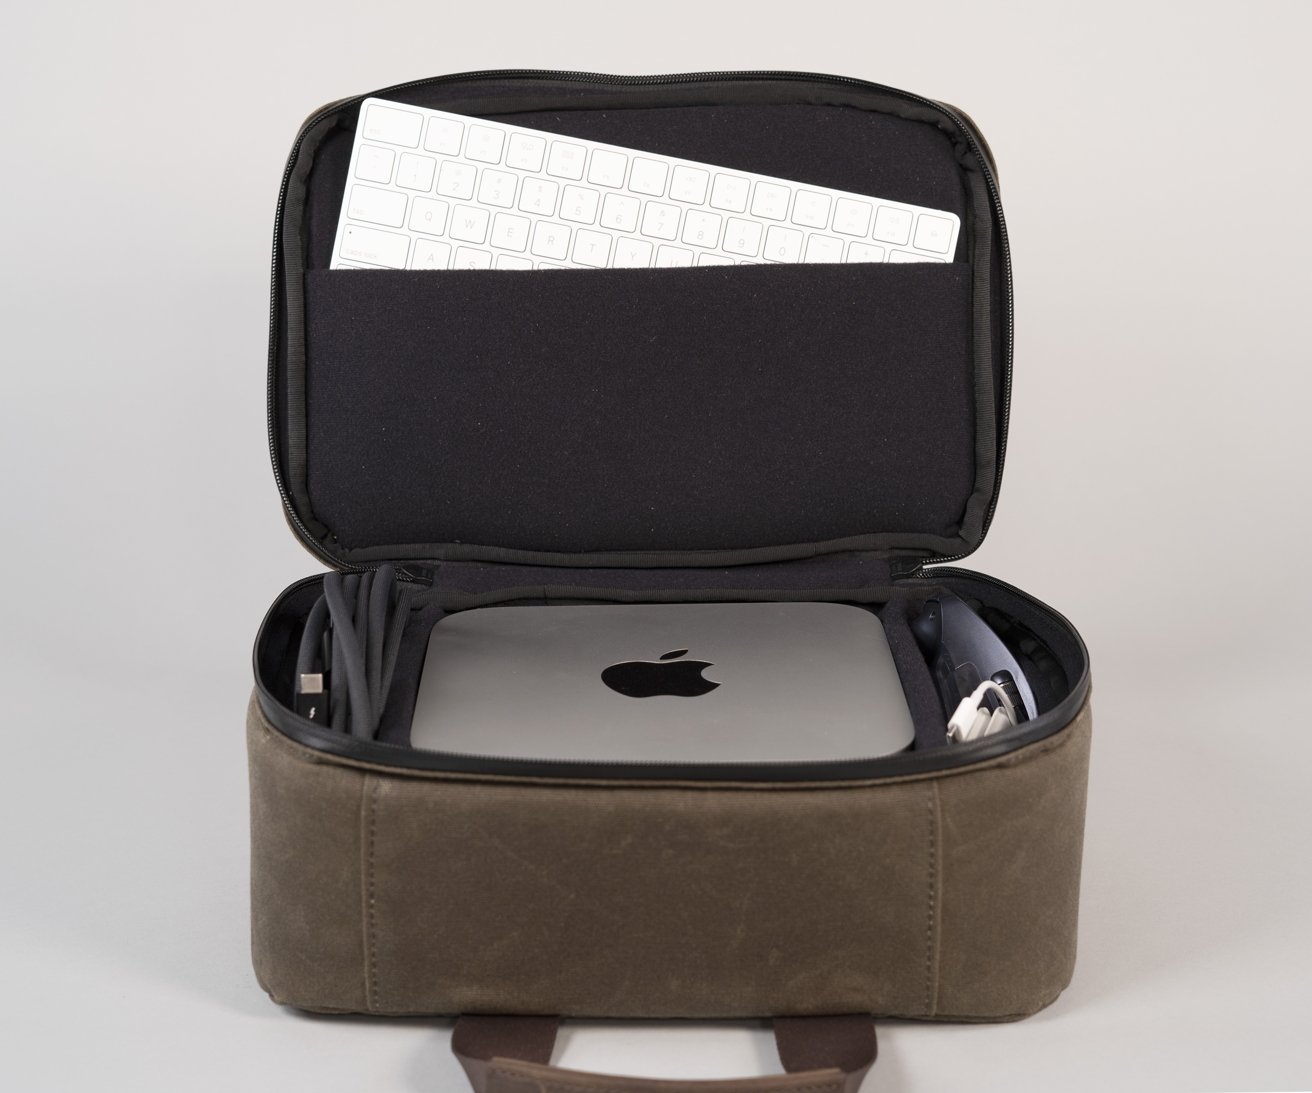 You can pack a lot into the WaterField Design Mac Studio Travel Bag